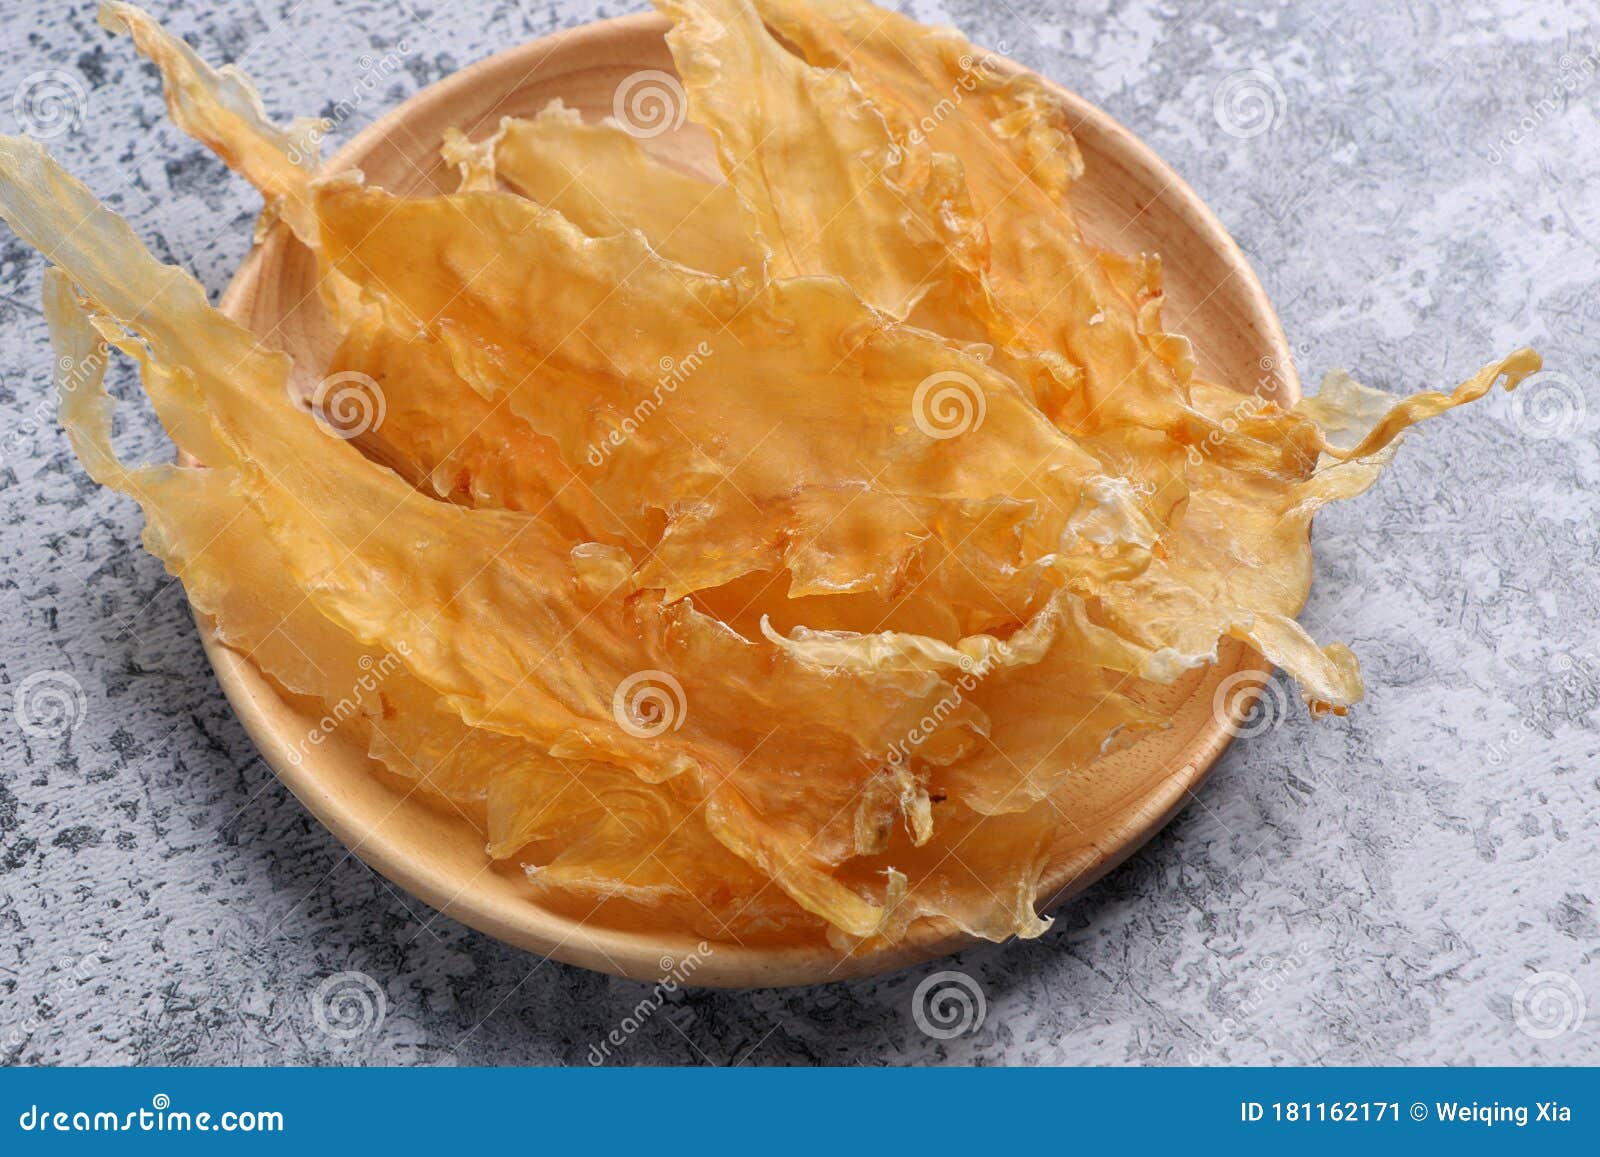 dried fish maw on wooden table.